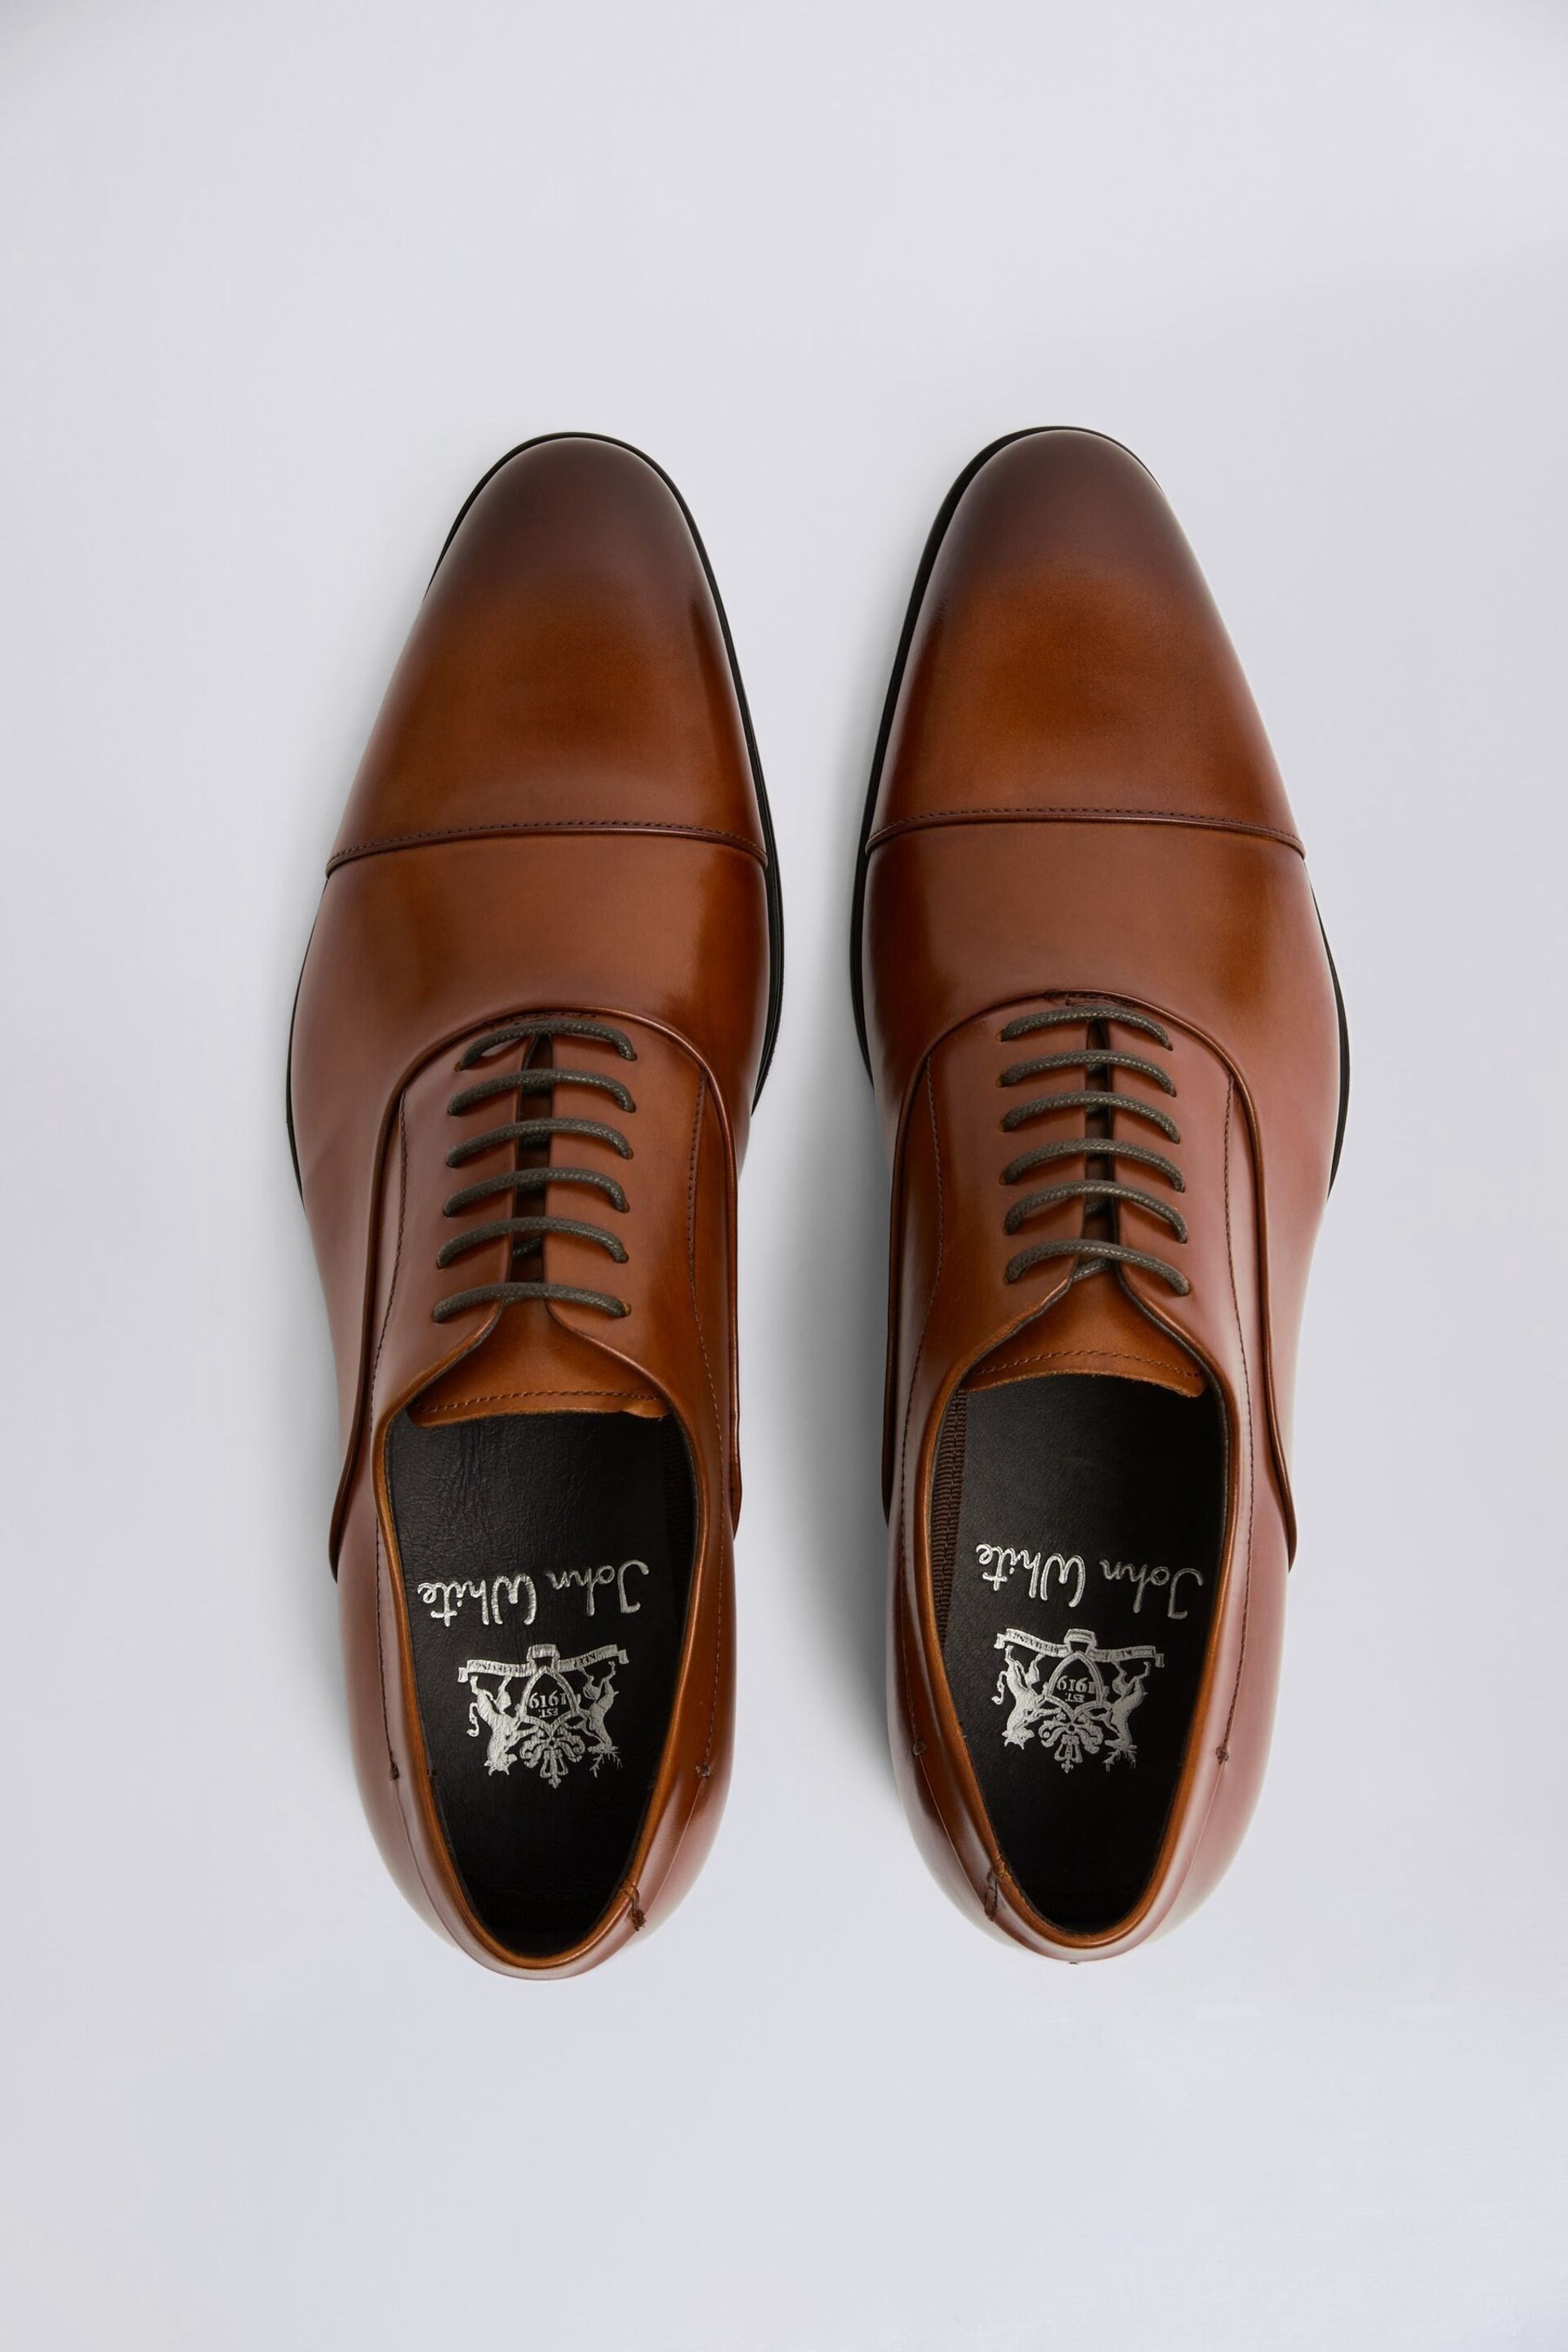 MOSS Tan John Guildhall Oxford Shoes - Image 3 of 5